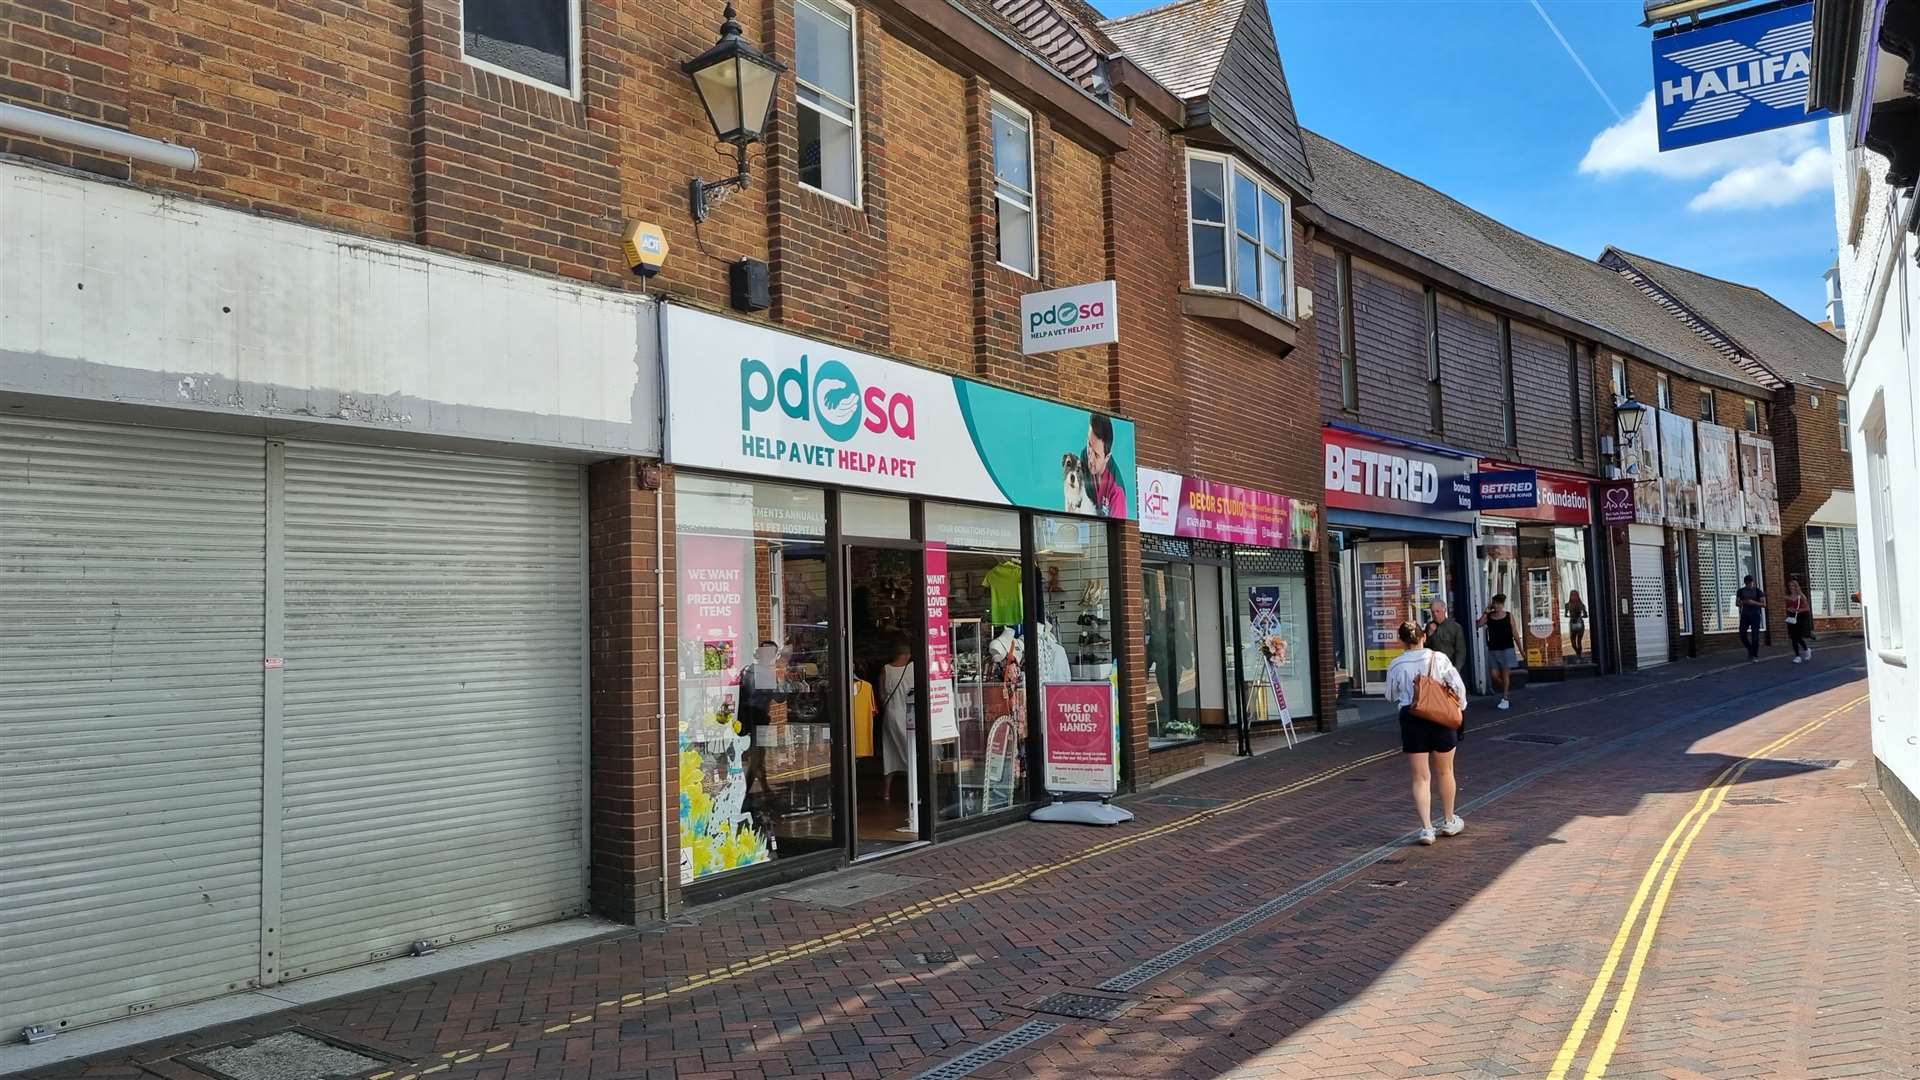 This row of shops in New Rents will be knocked down to make way for the hotel scheme